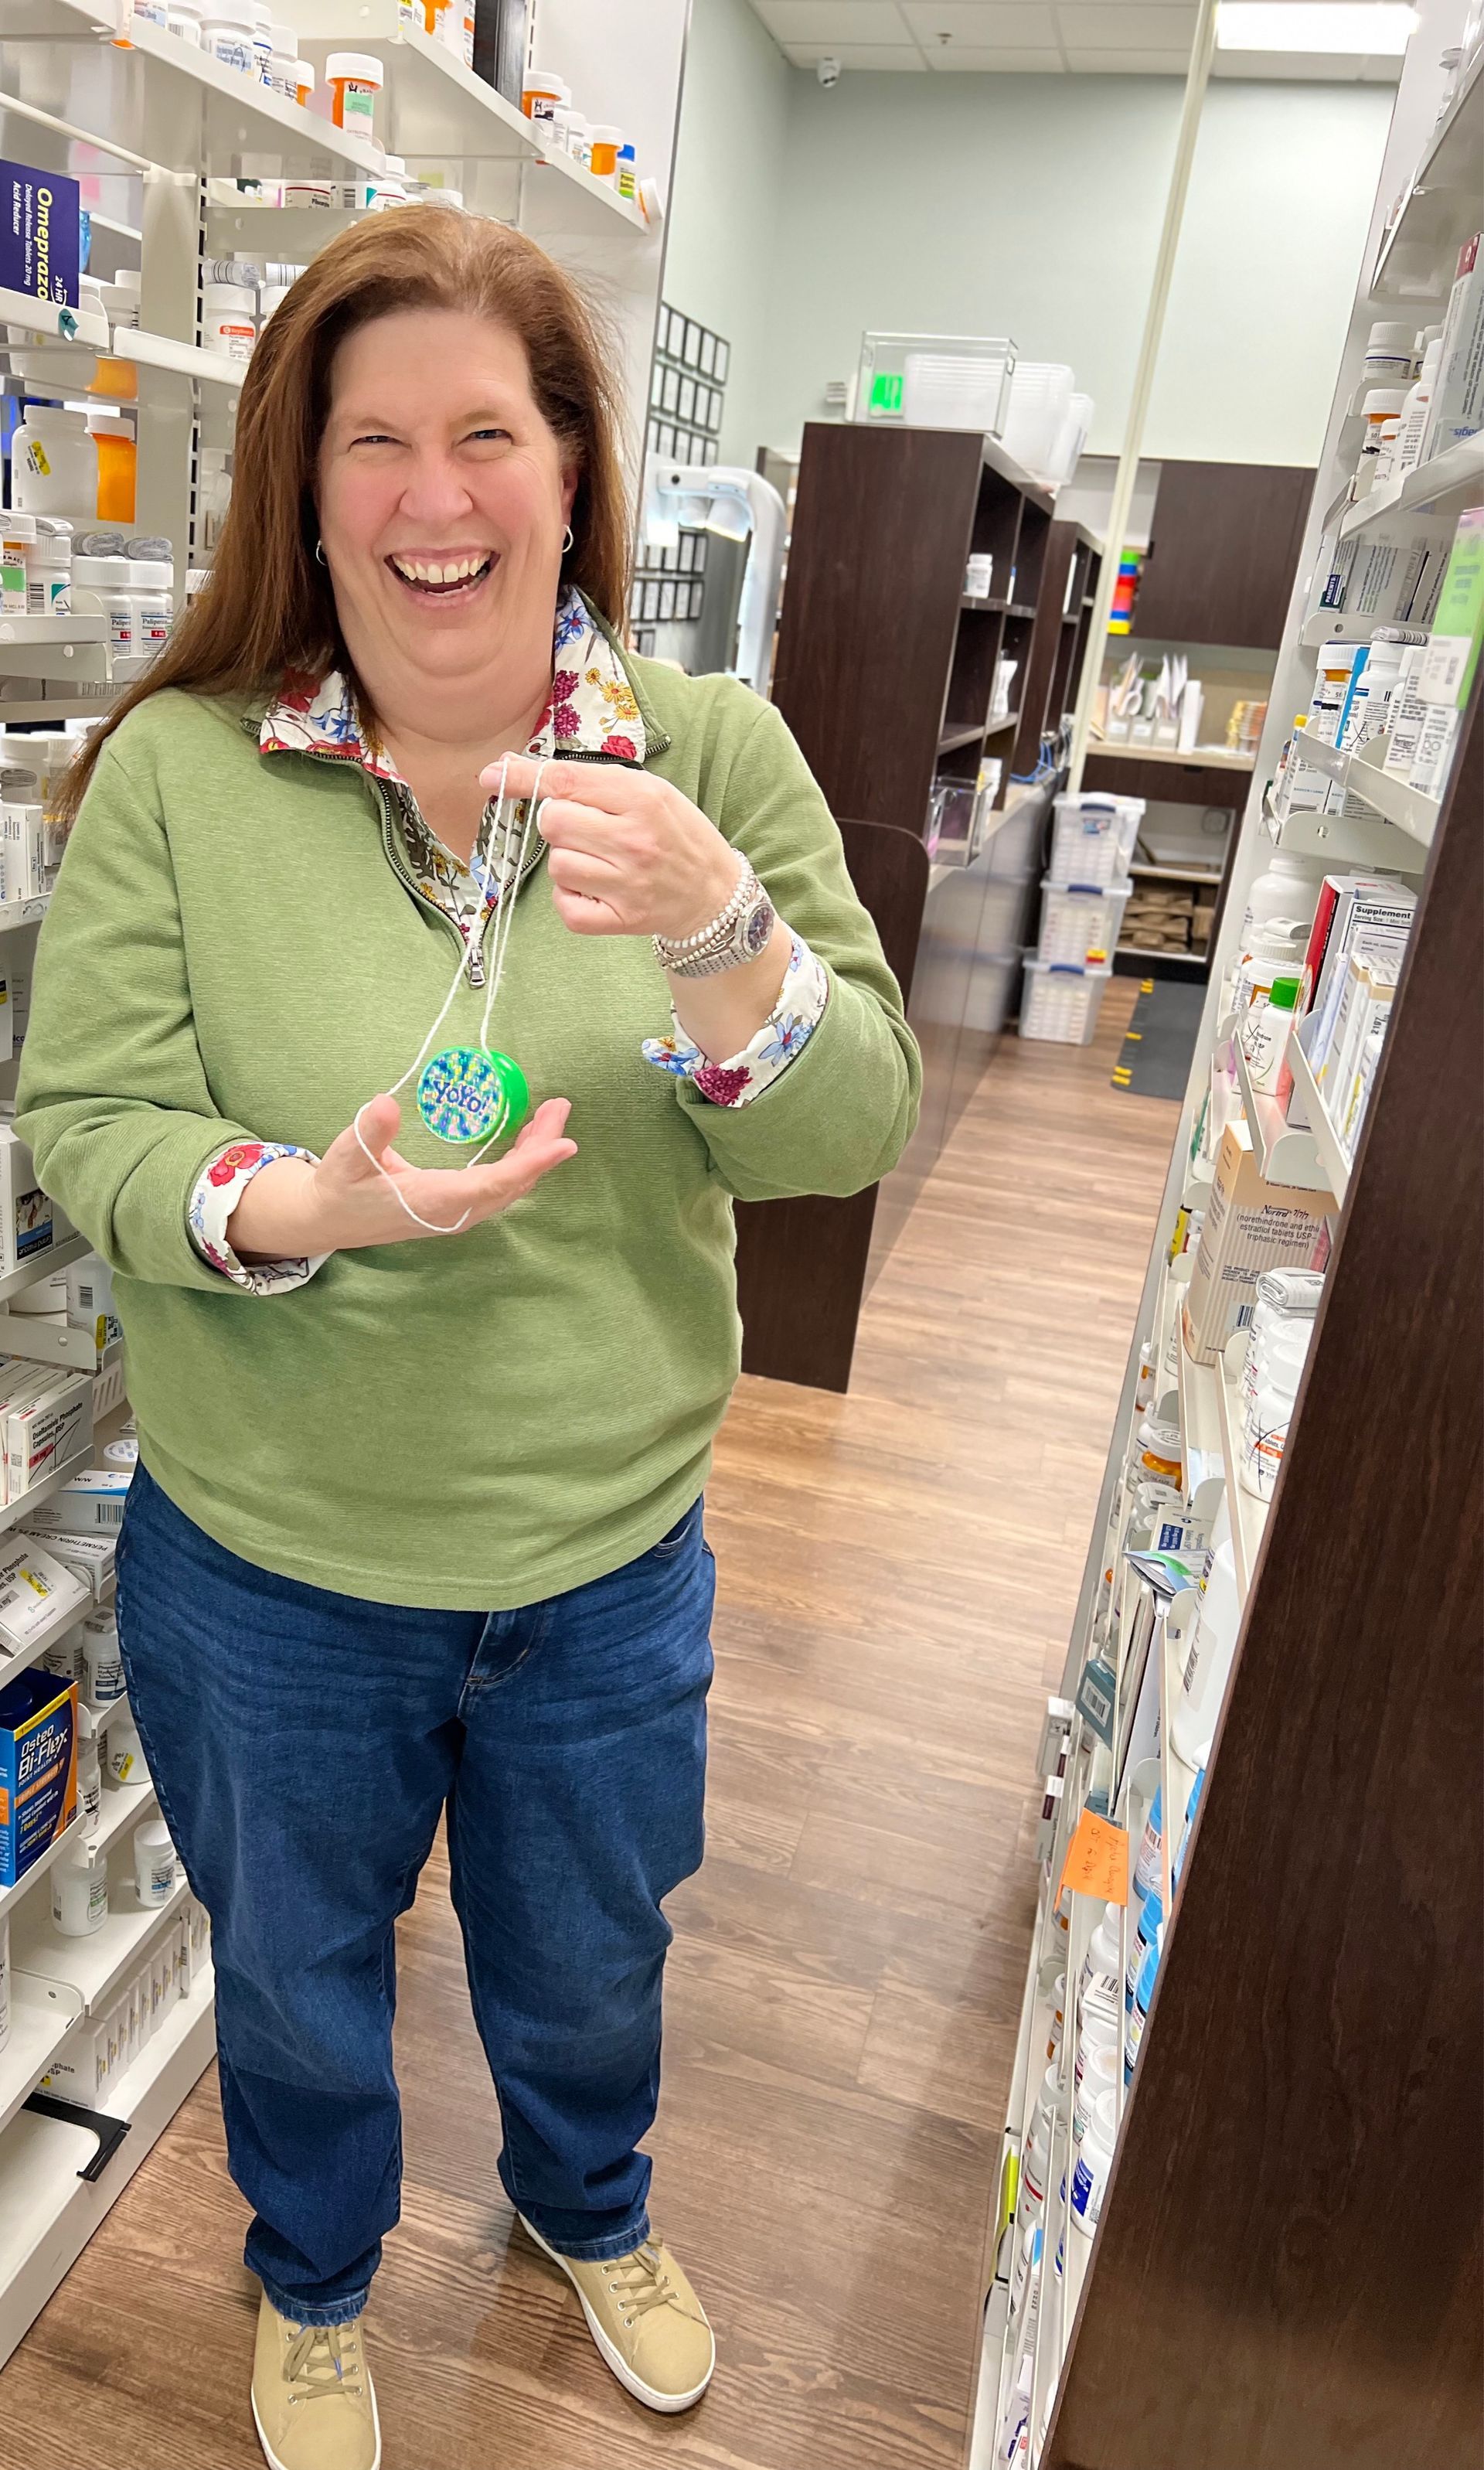 Our pharmacist Susan doing a 